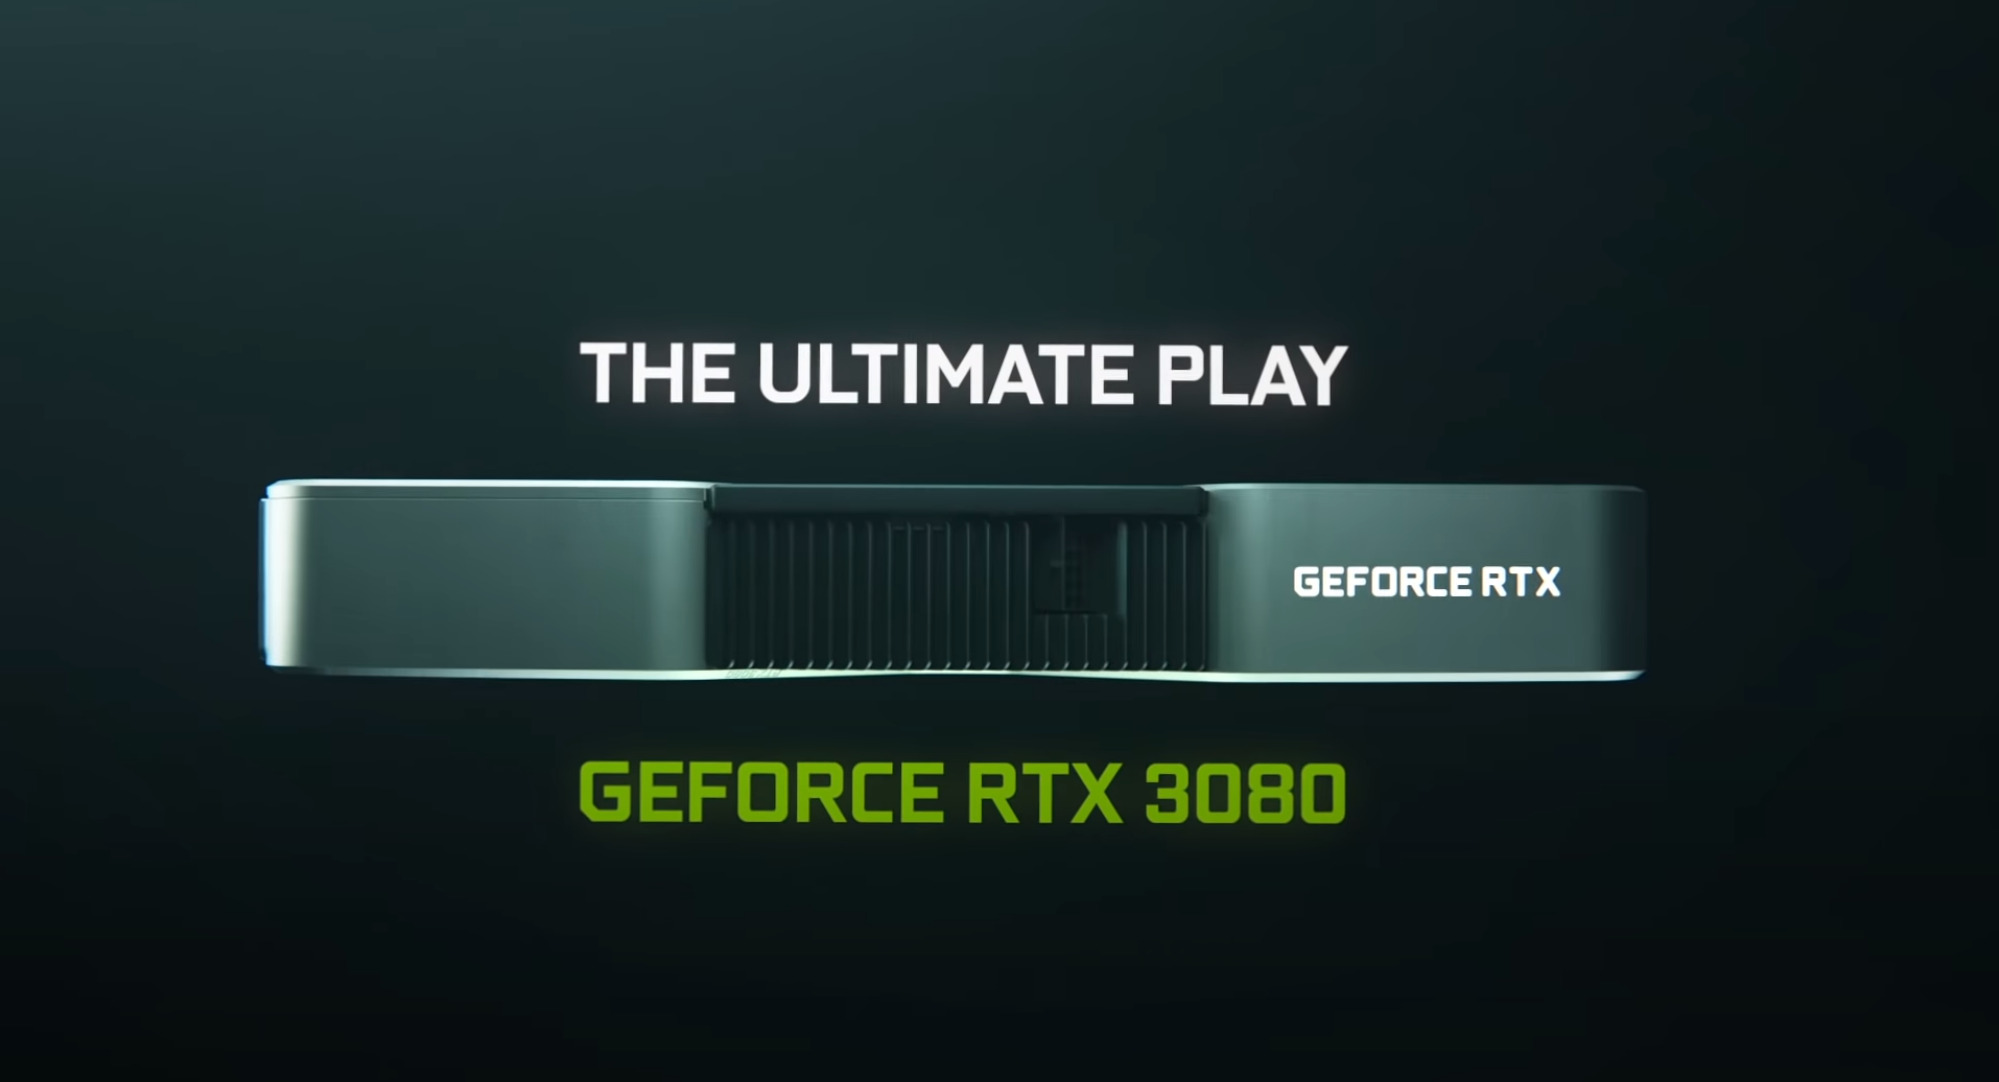 Will Nvidia’s RTX 3070 Launch Mirror The Same Issues As The Failed 3080 Launch?